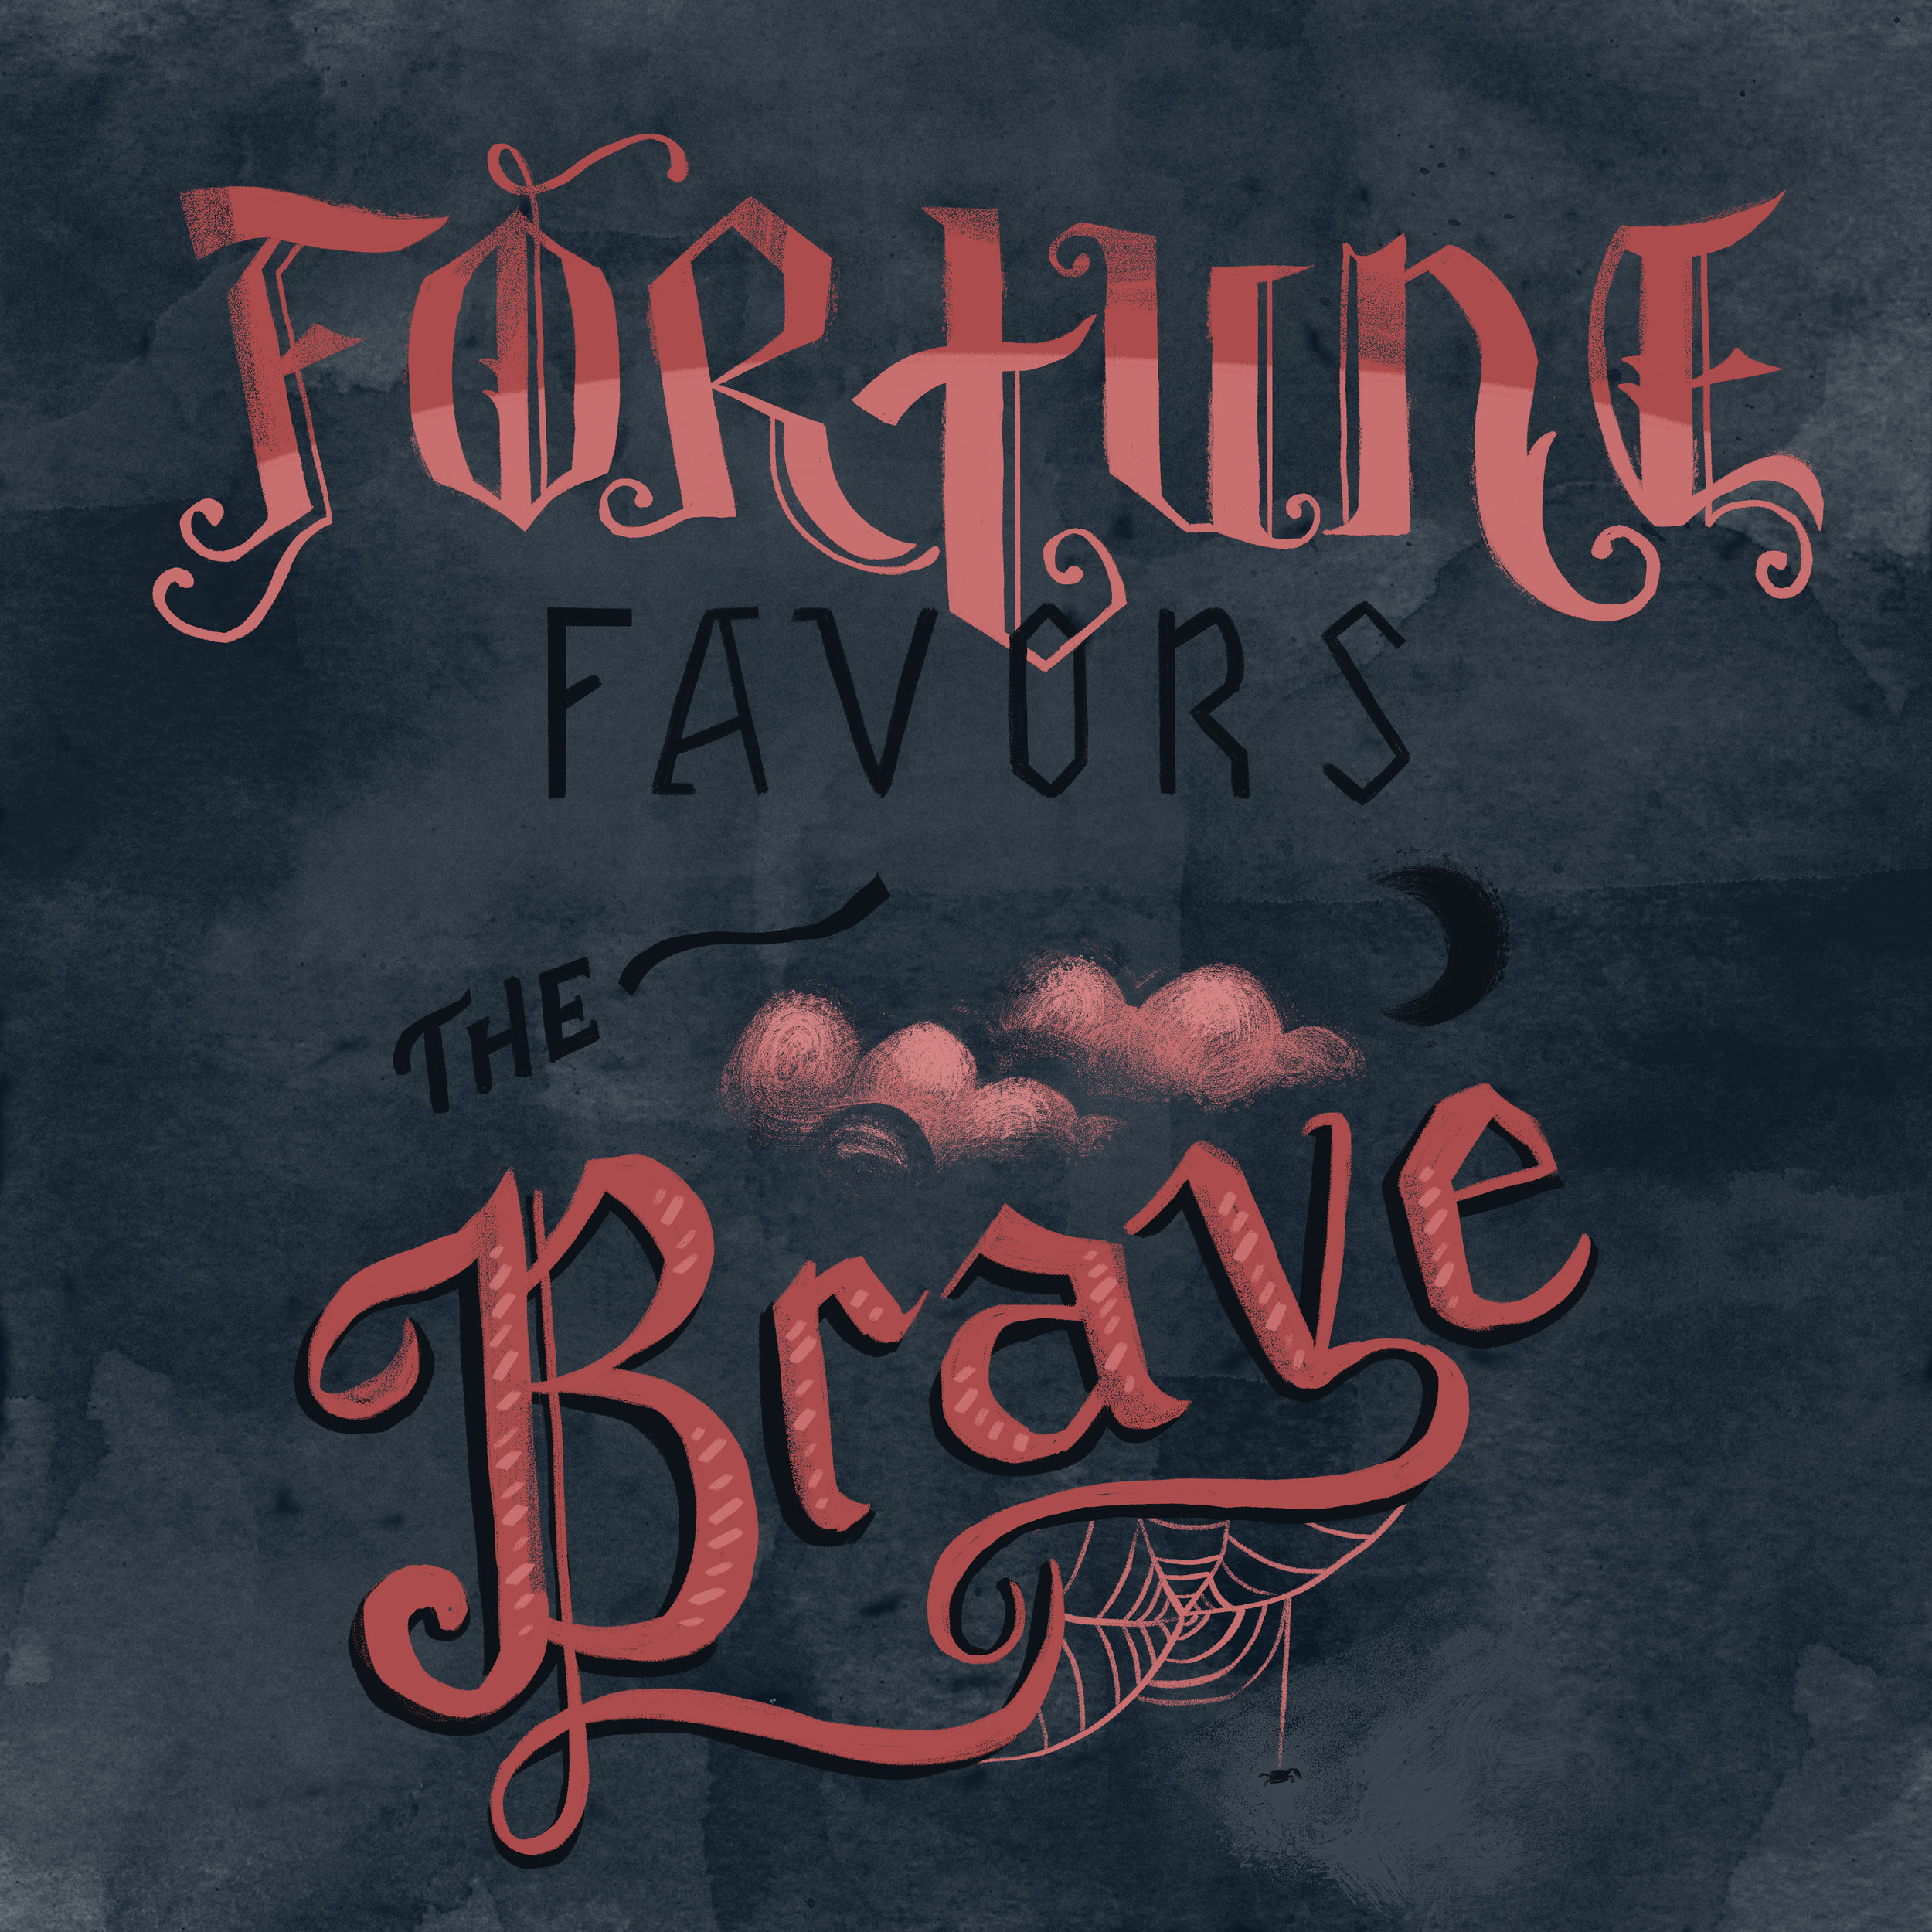 Fortune Favors the Brave.jpg